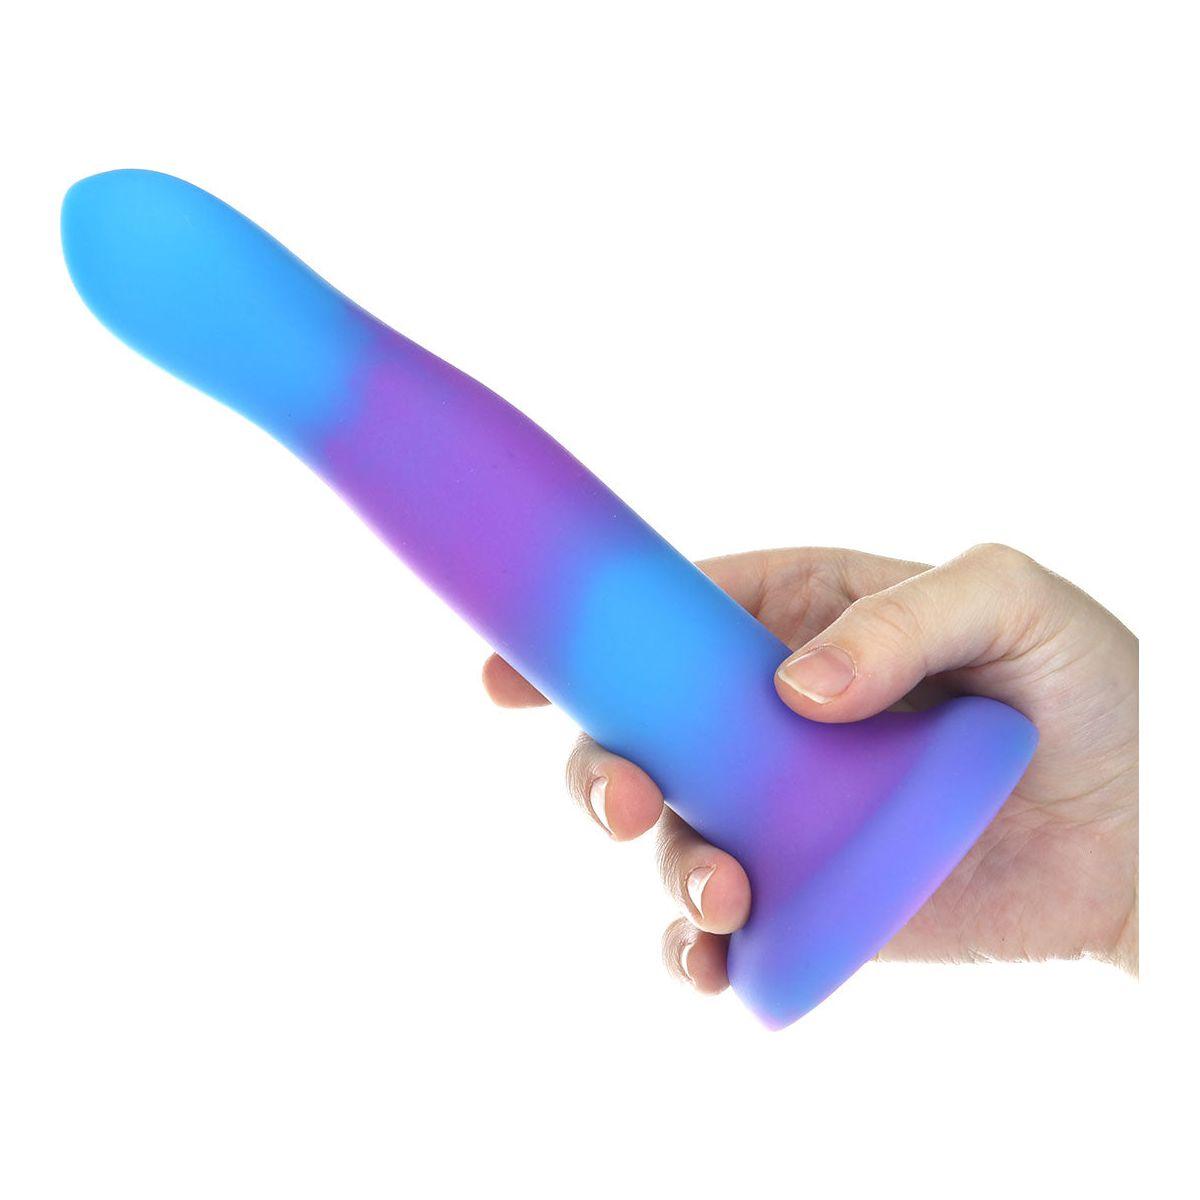 Addiction Glow-in-the-Dark Rave Dil 8&quot; - Purple Blue - shop enby